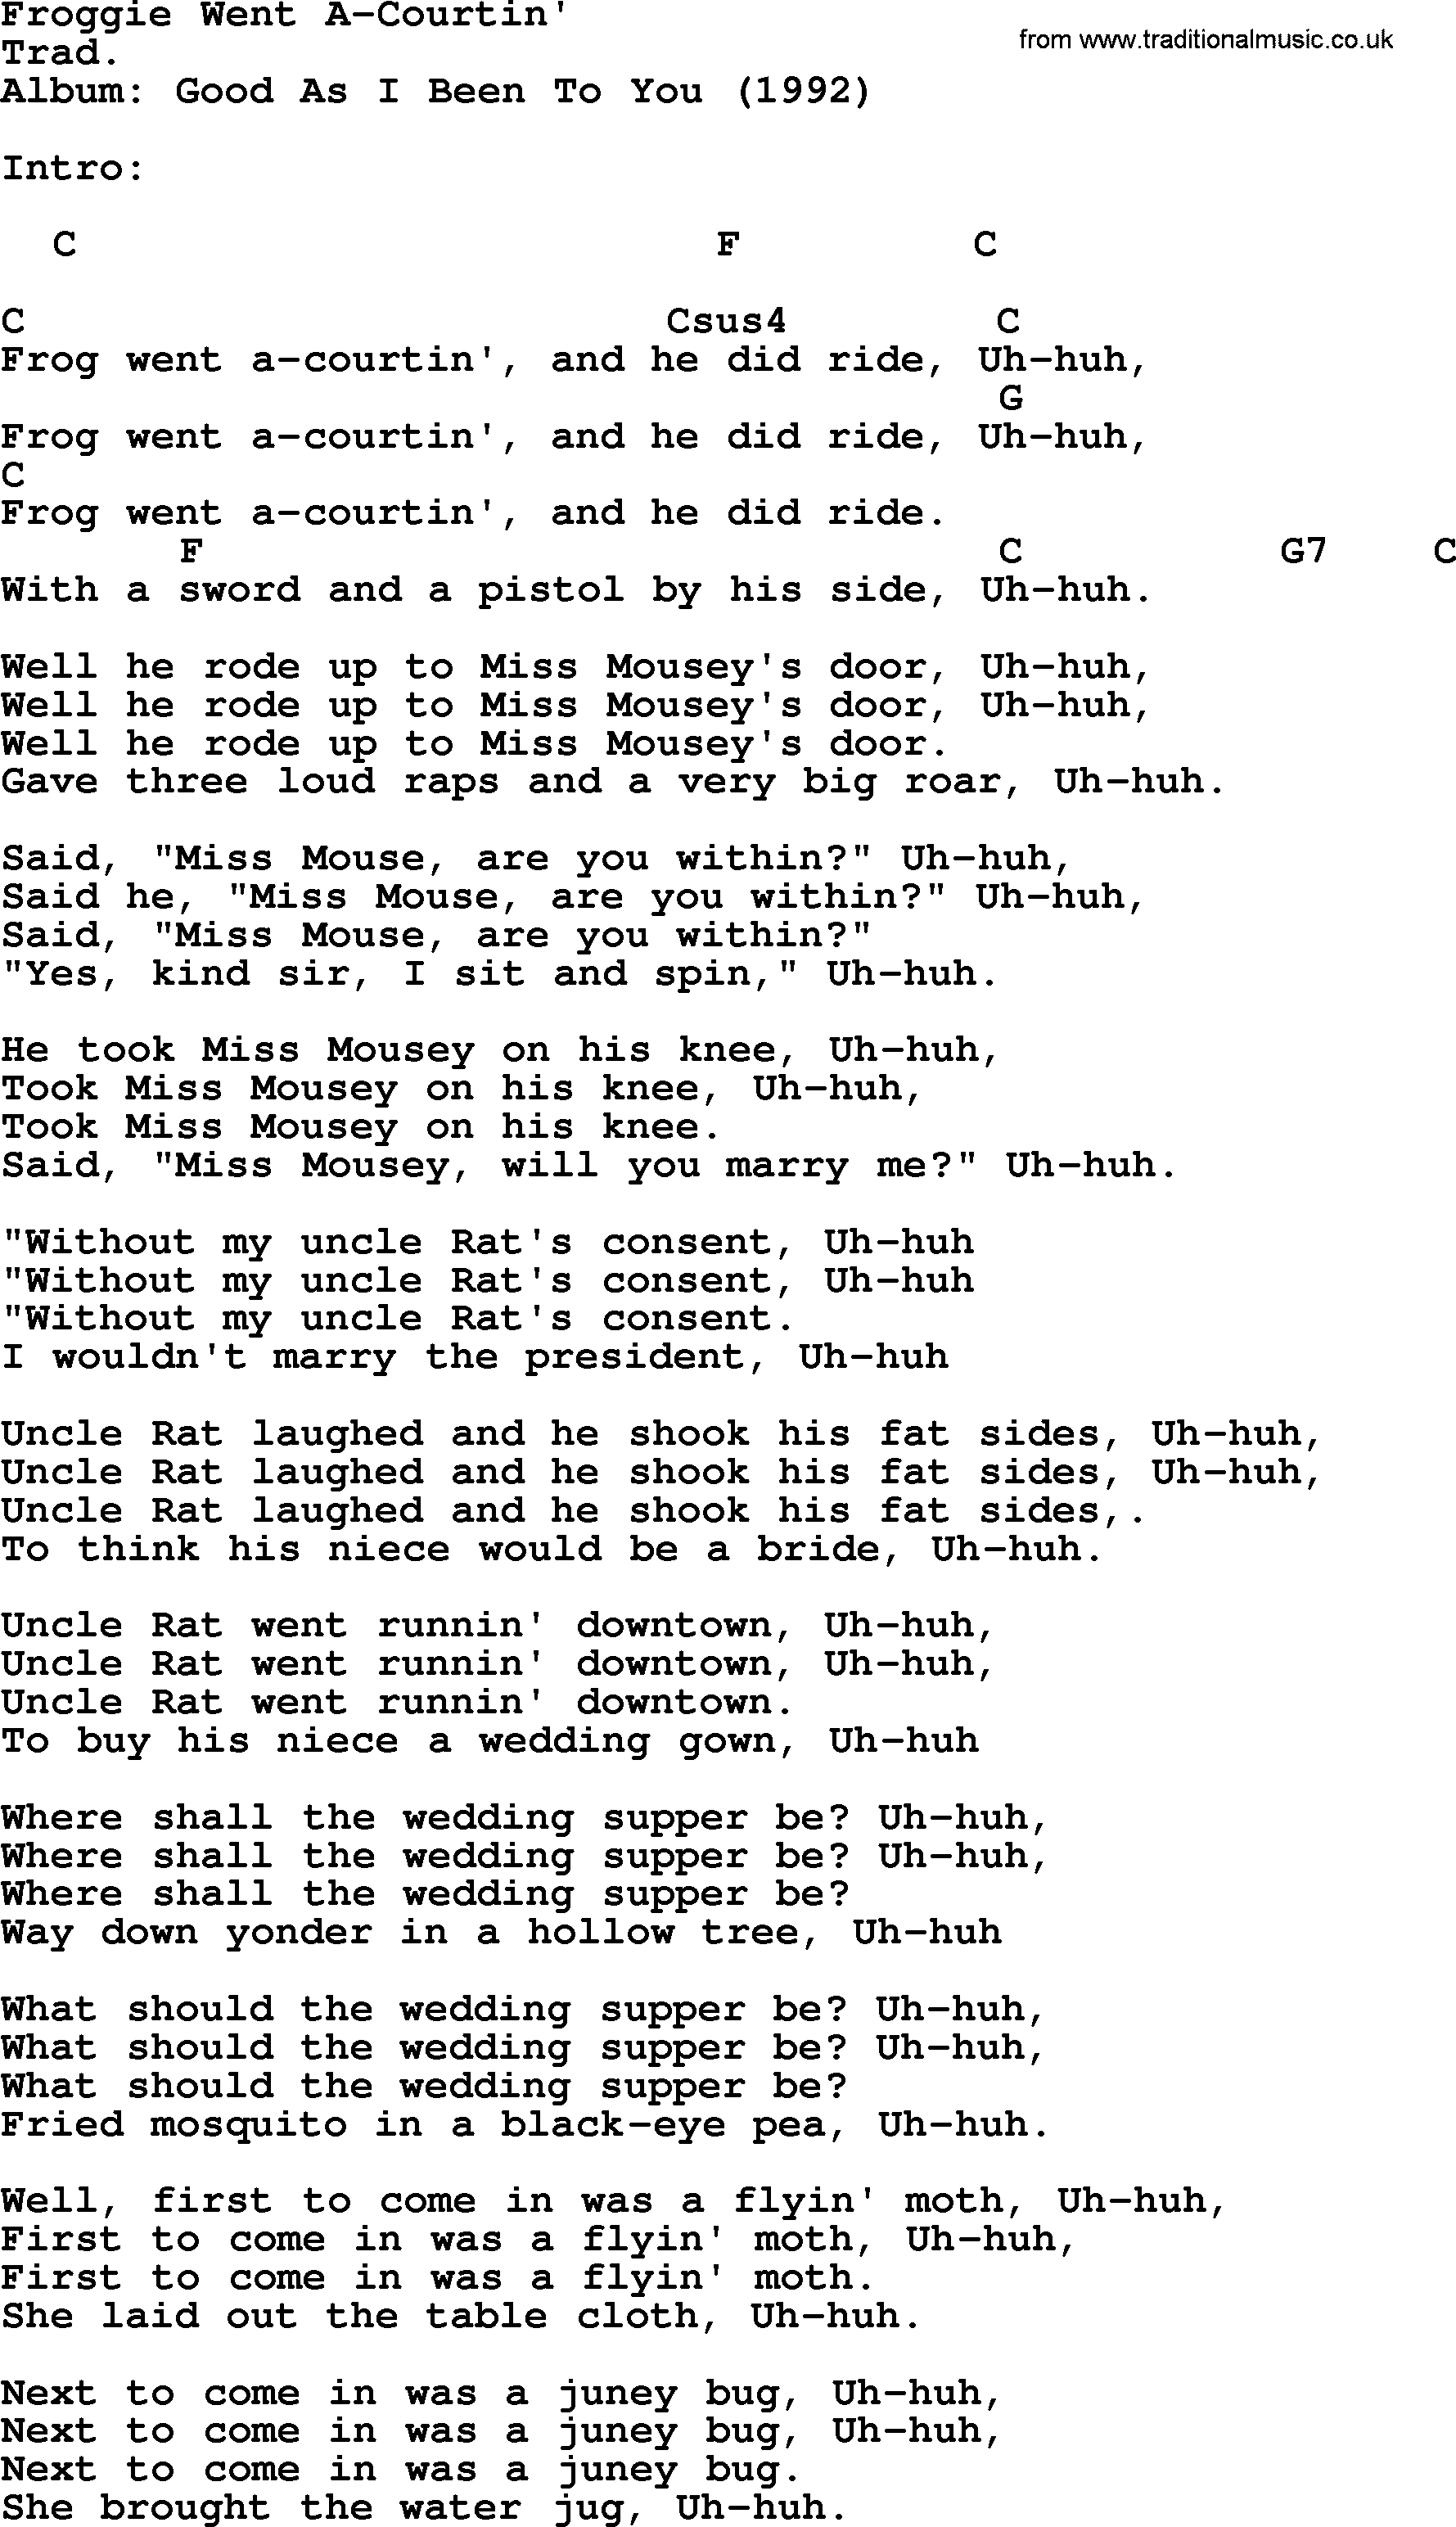 Bob Dylan song, lyrics with chords - Froggie Went A-Courtin'